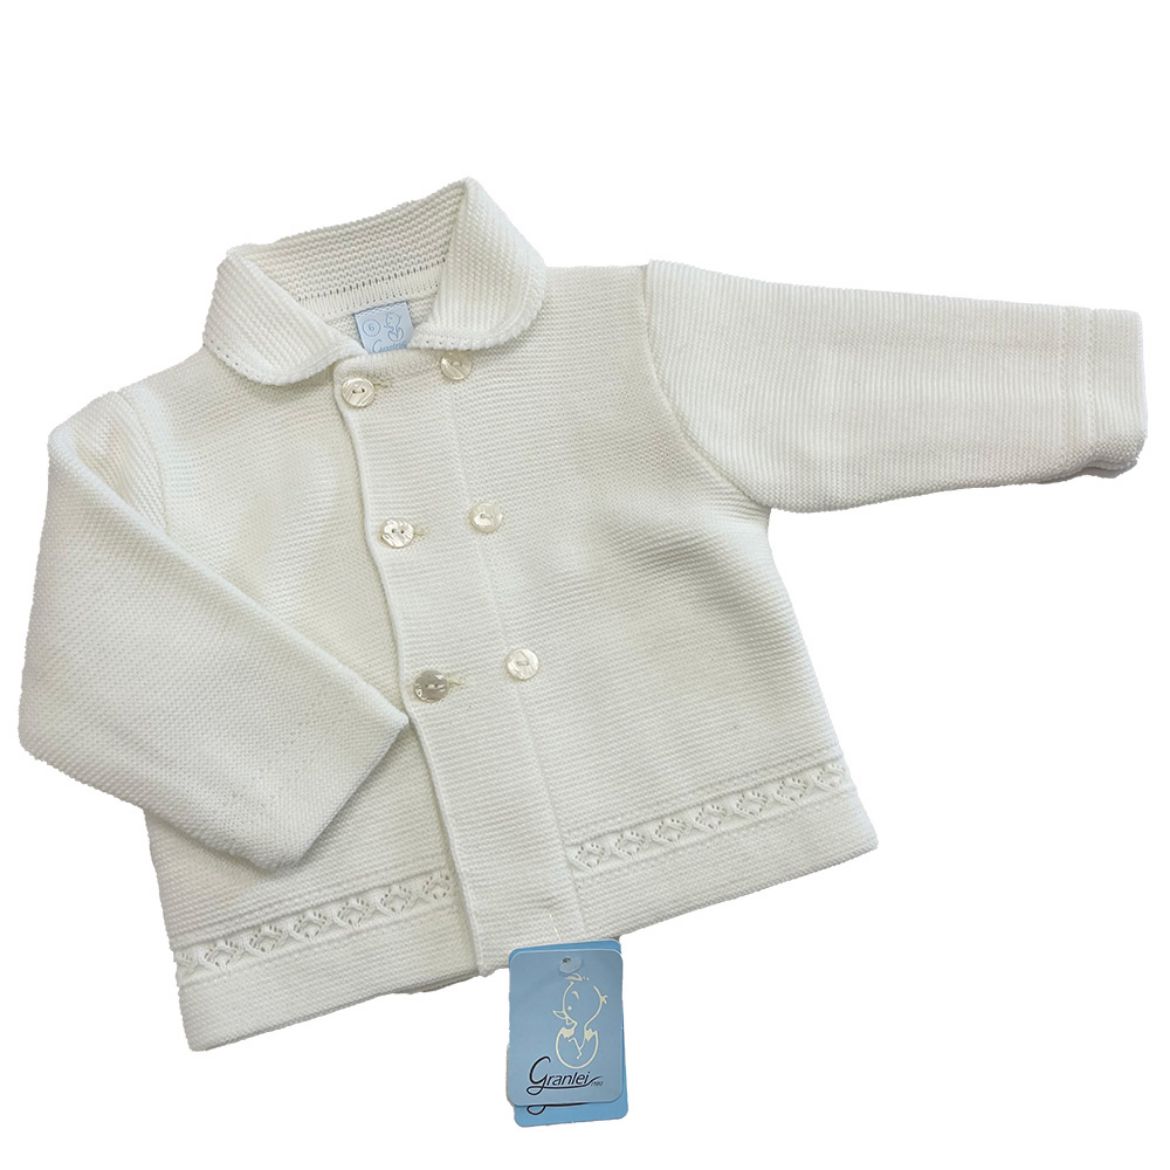 Picture of Granlei Boys Cream Knitted Cardigan